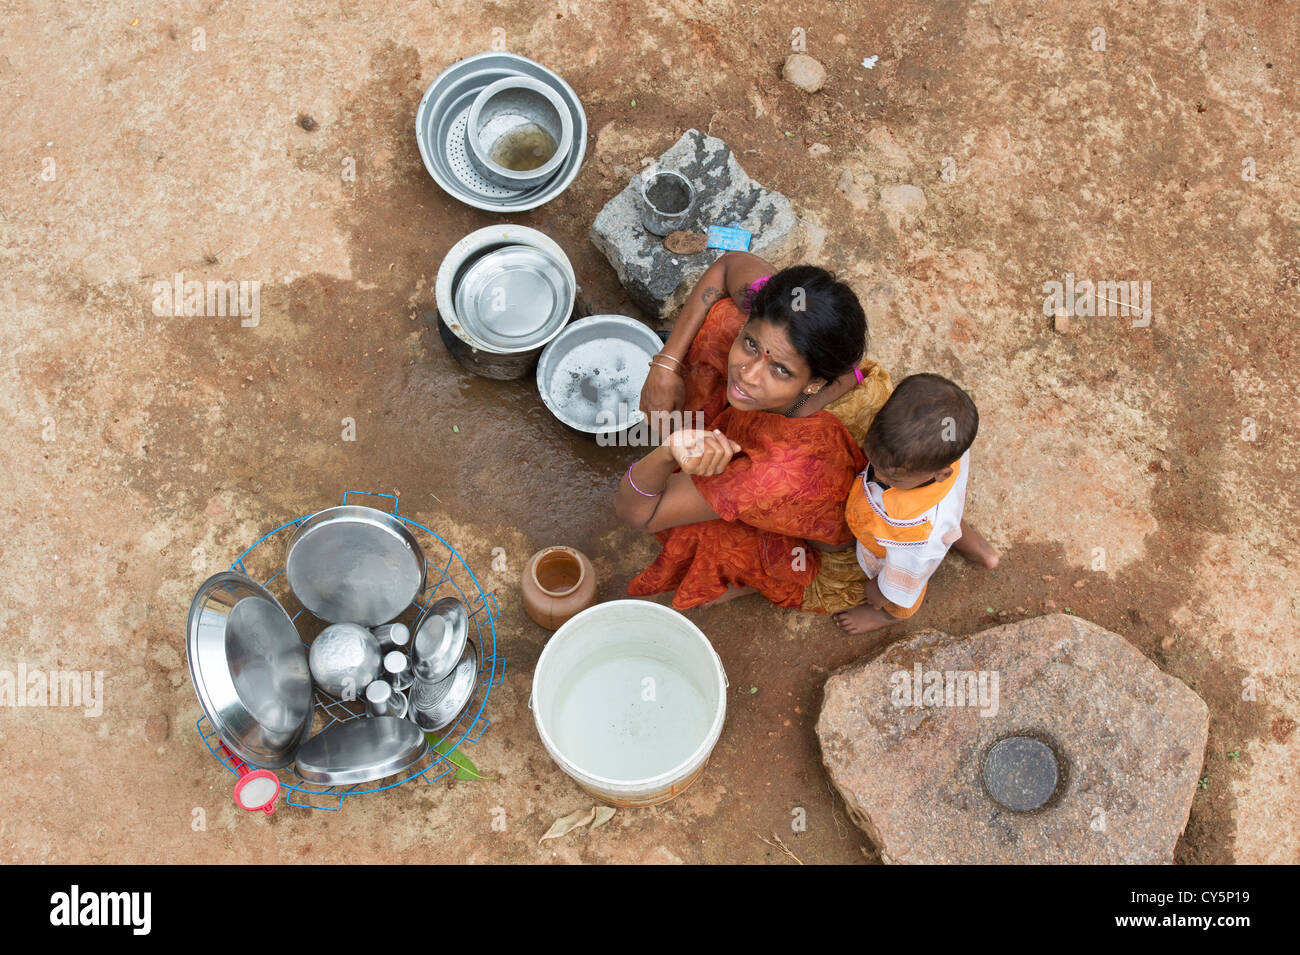 Young Indian mother and child washing dishes outside their rural indian village home. Andhra Pradesh, India Stock Photo